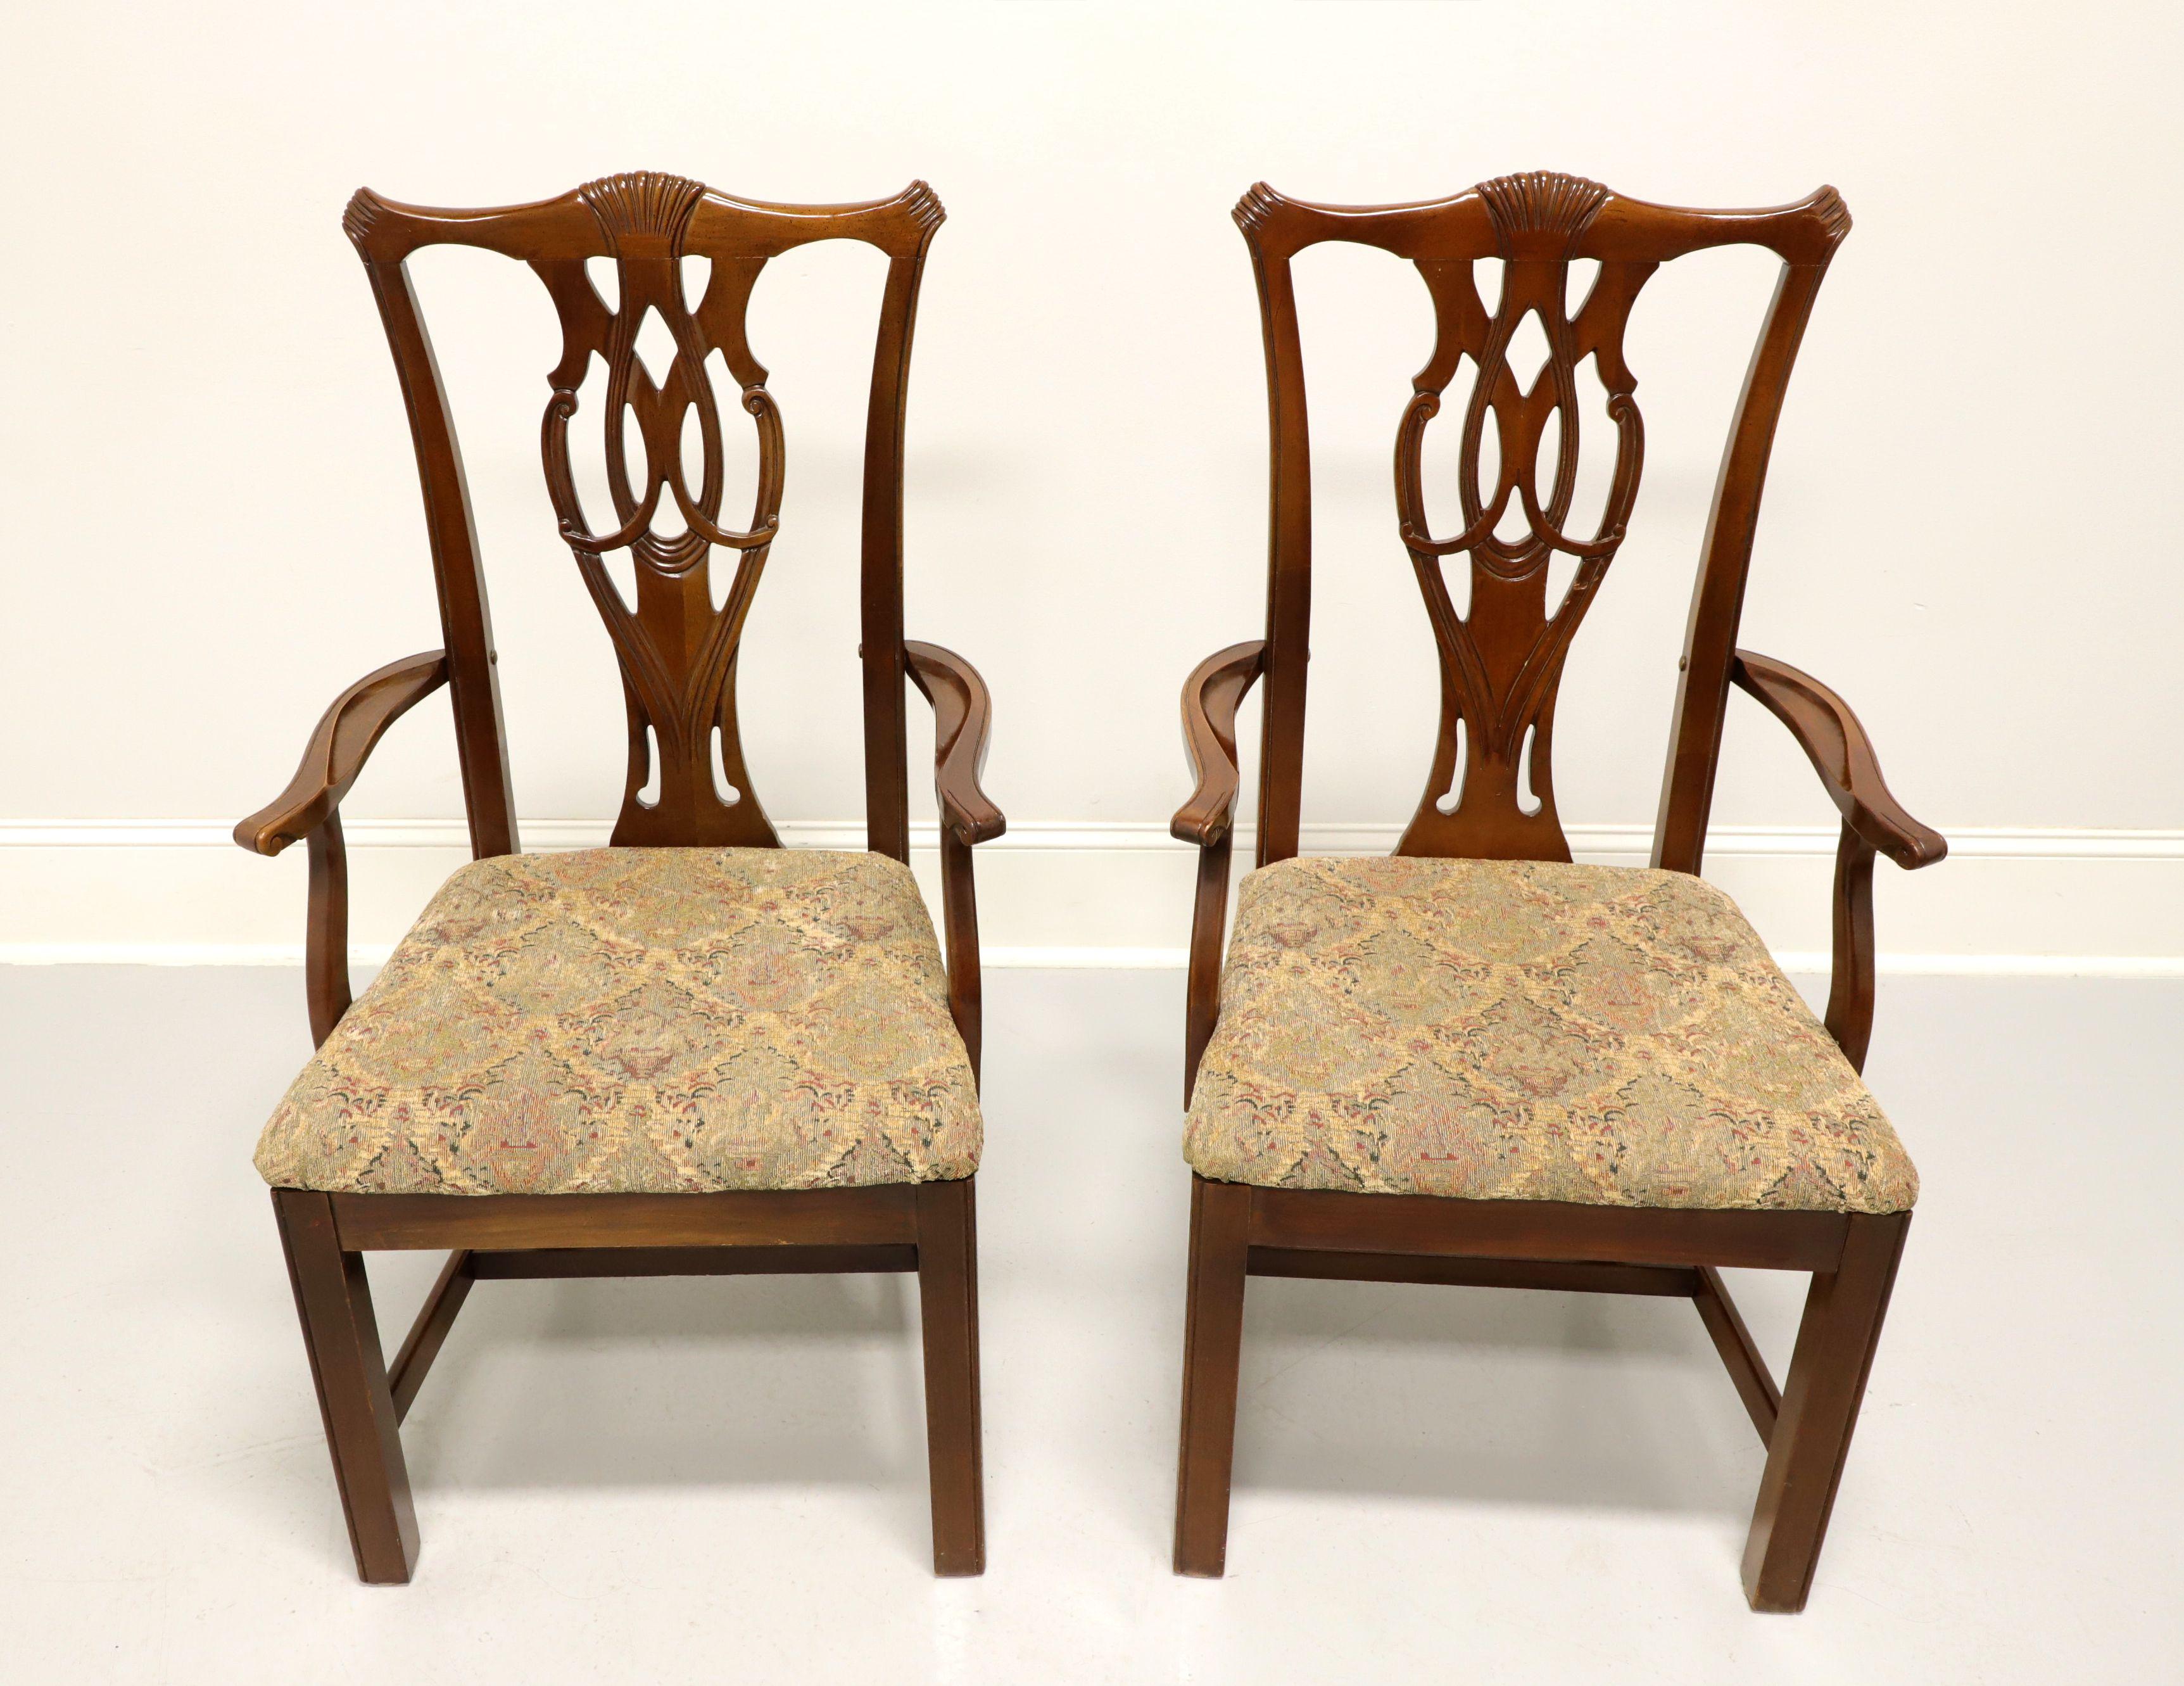 A pair of dining armchairs in the Chippendale style by Thomasville. Solid cherry with carved crest rail, carved seat back, curved arms, multi-color pattern fabric upholstered seat, straight legs and stretchers. Made in Thomasville, North Carolina,